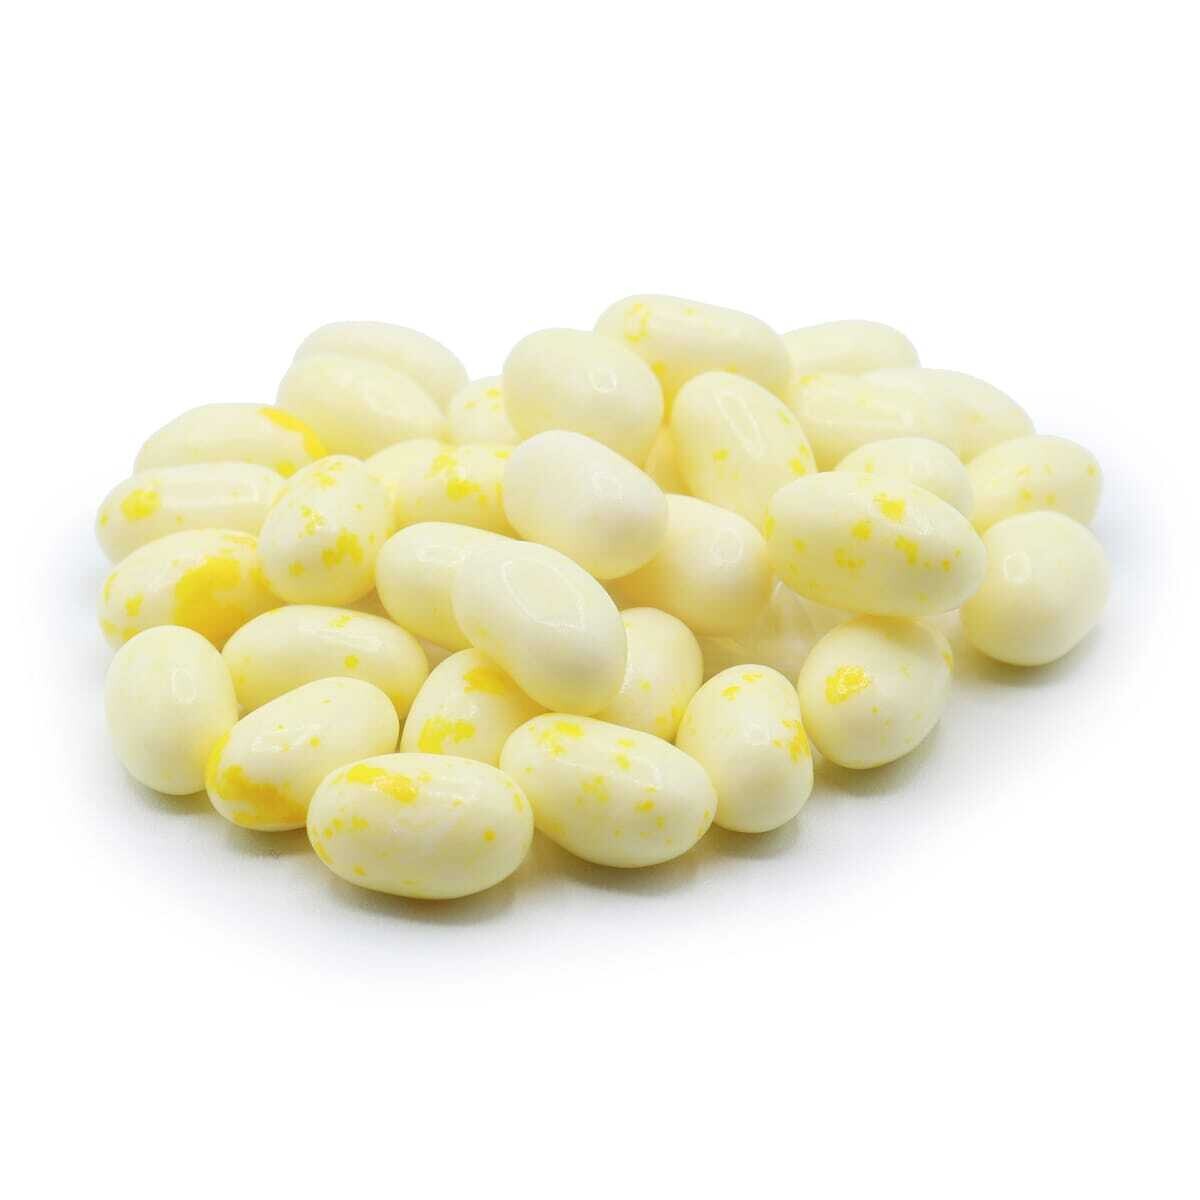 BUTTERED POPCORN - Jelly Belly Jelly Beans